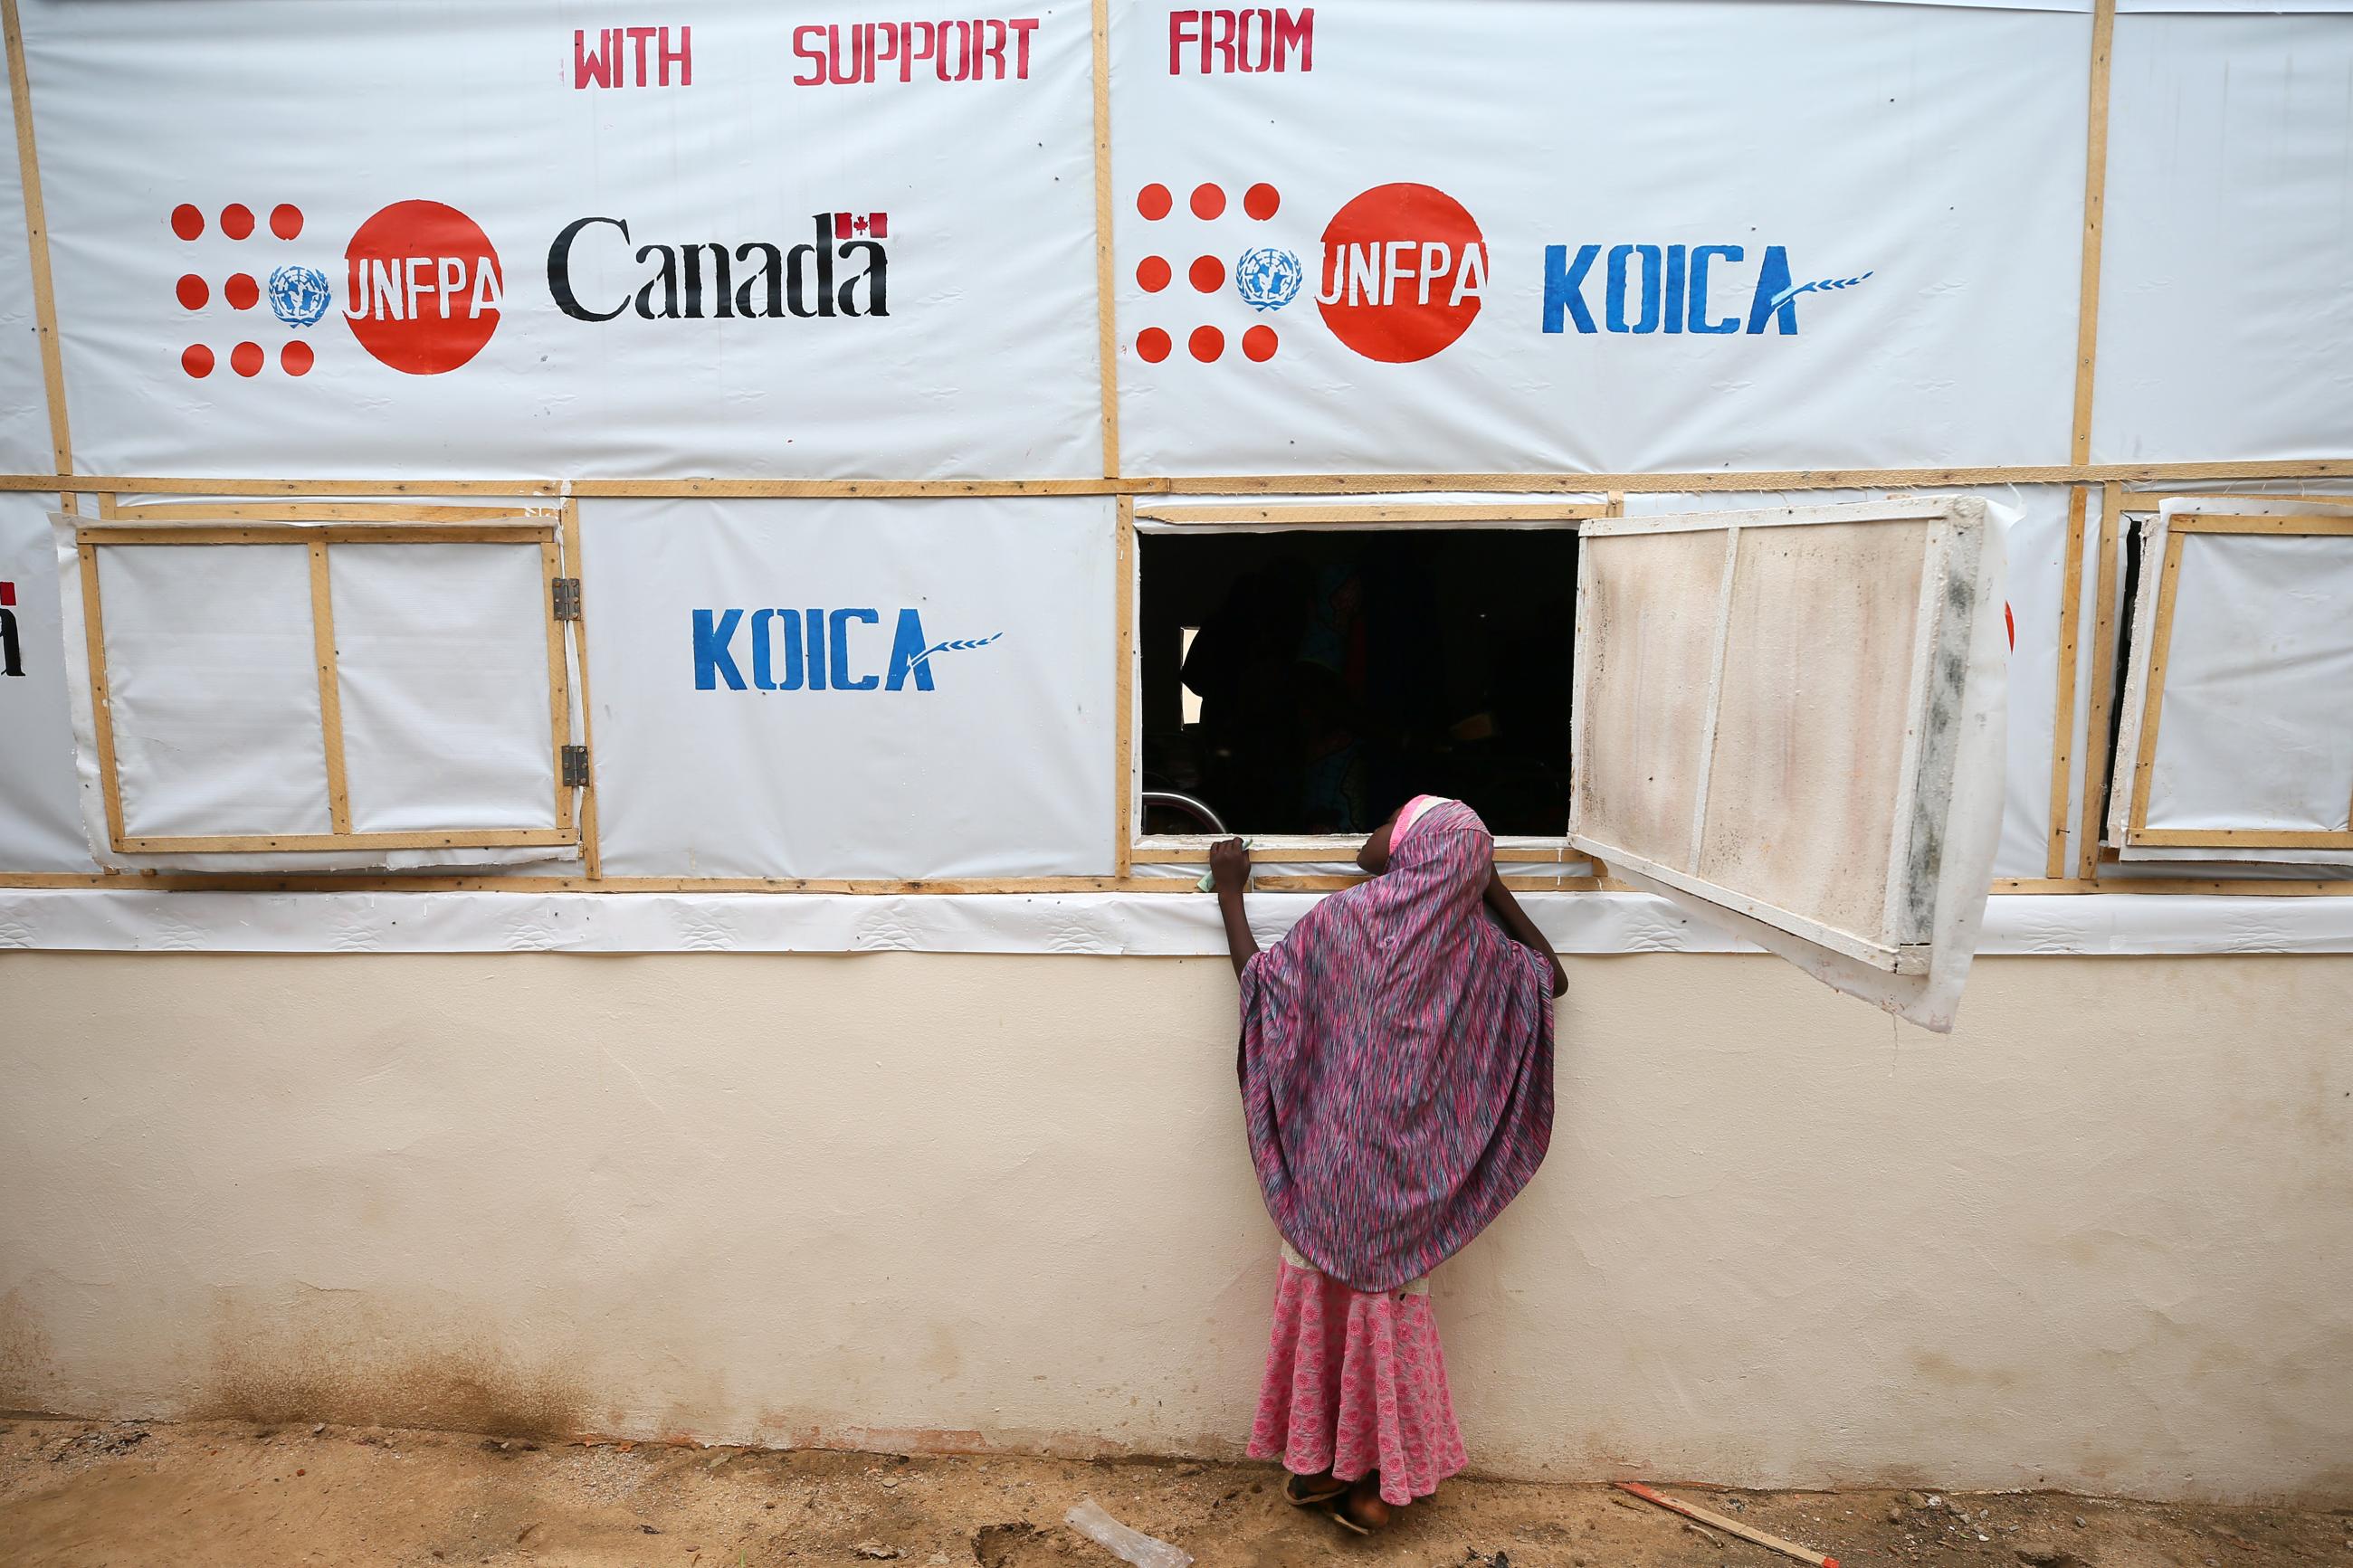 A girl looks through a window of a recovery ward at an obstetric fistula repair center in Maiduguri, Nigeria, on August 1, 2018.